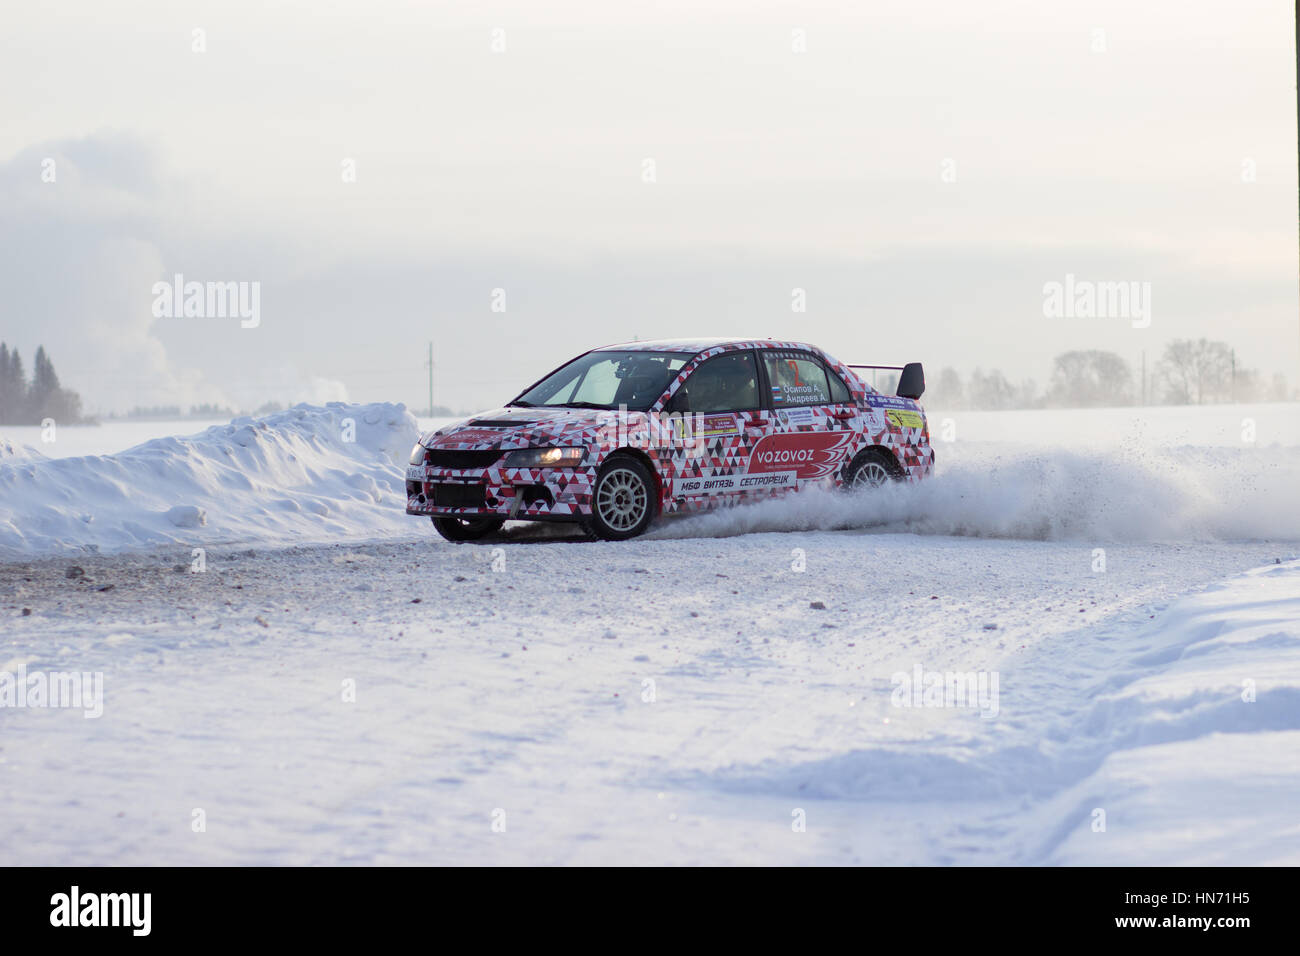 Kirov, Russia 17 December 2016 - 1st stage of the Russian Cup Rally 2017, a car Mitsubishi Lancer Evo the IX, the driver Osipov, start number 2 Stock Photo